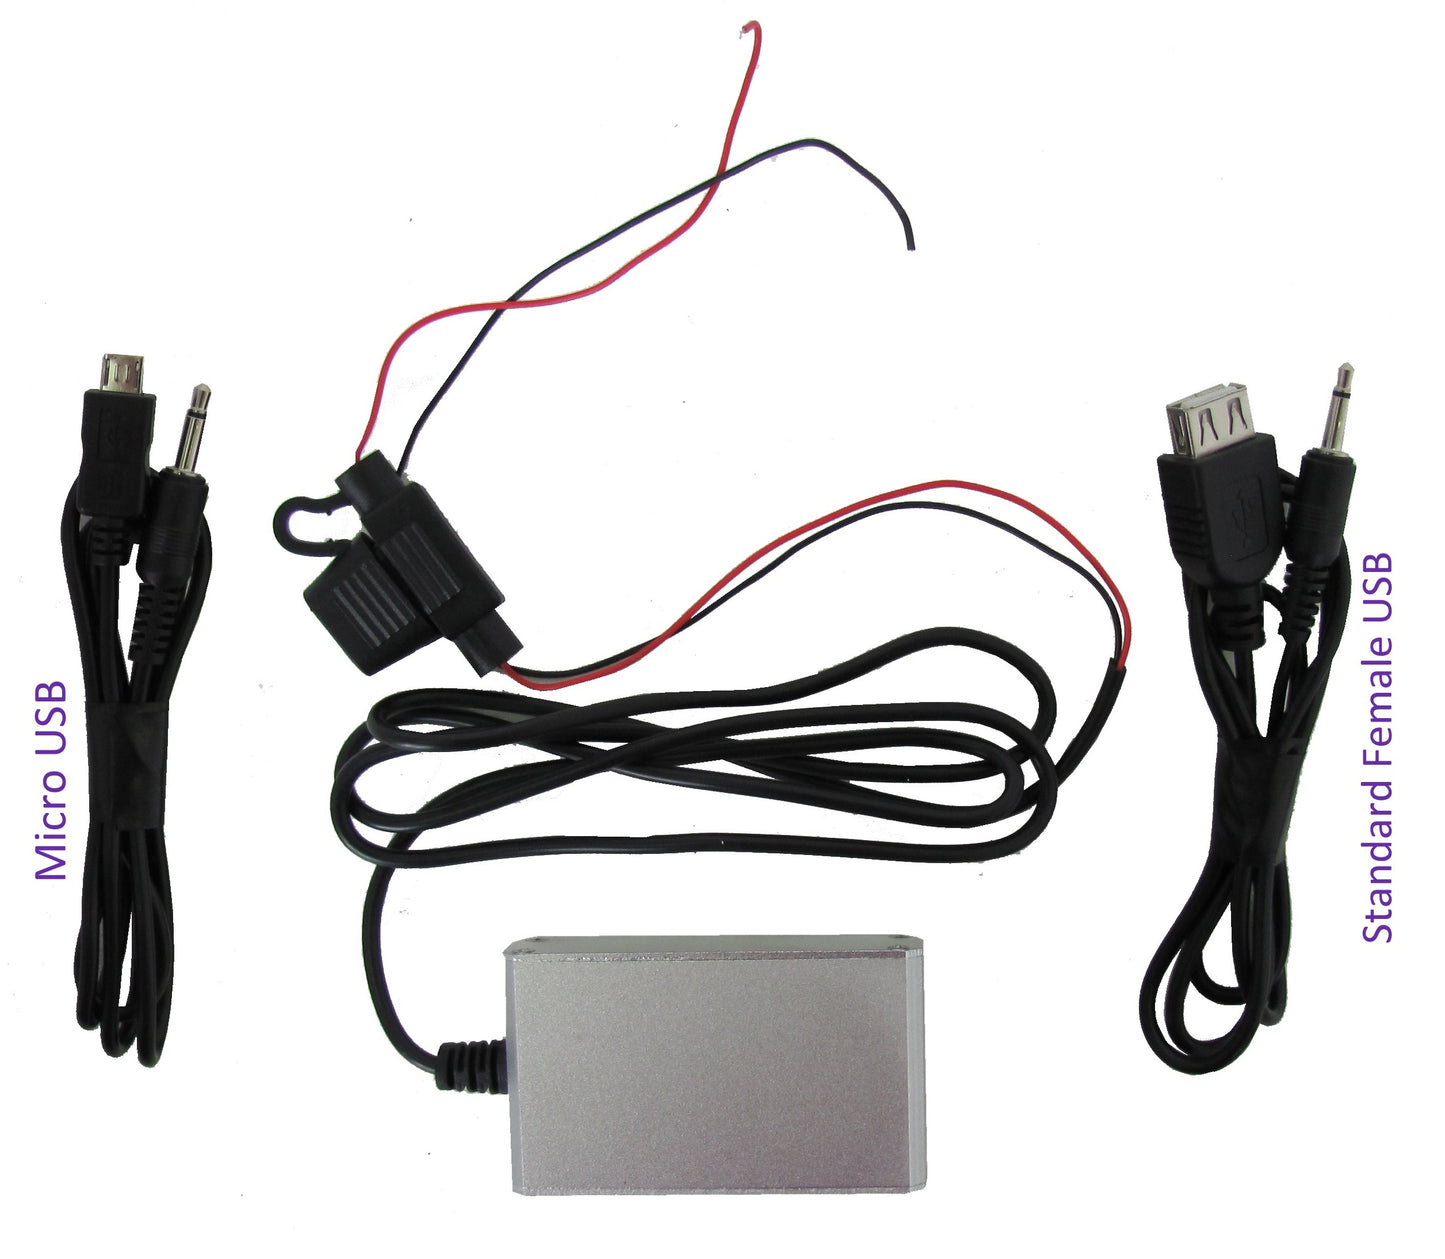 Remote USB Charging Kit for Land Rover Defender with USB & Micro USB Leads